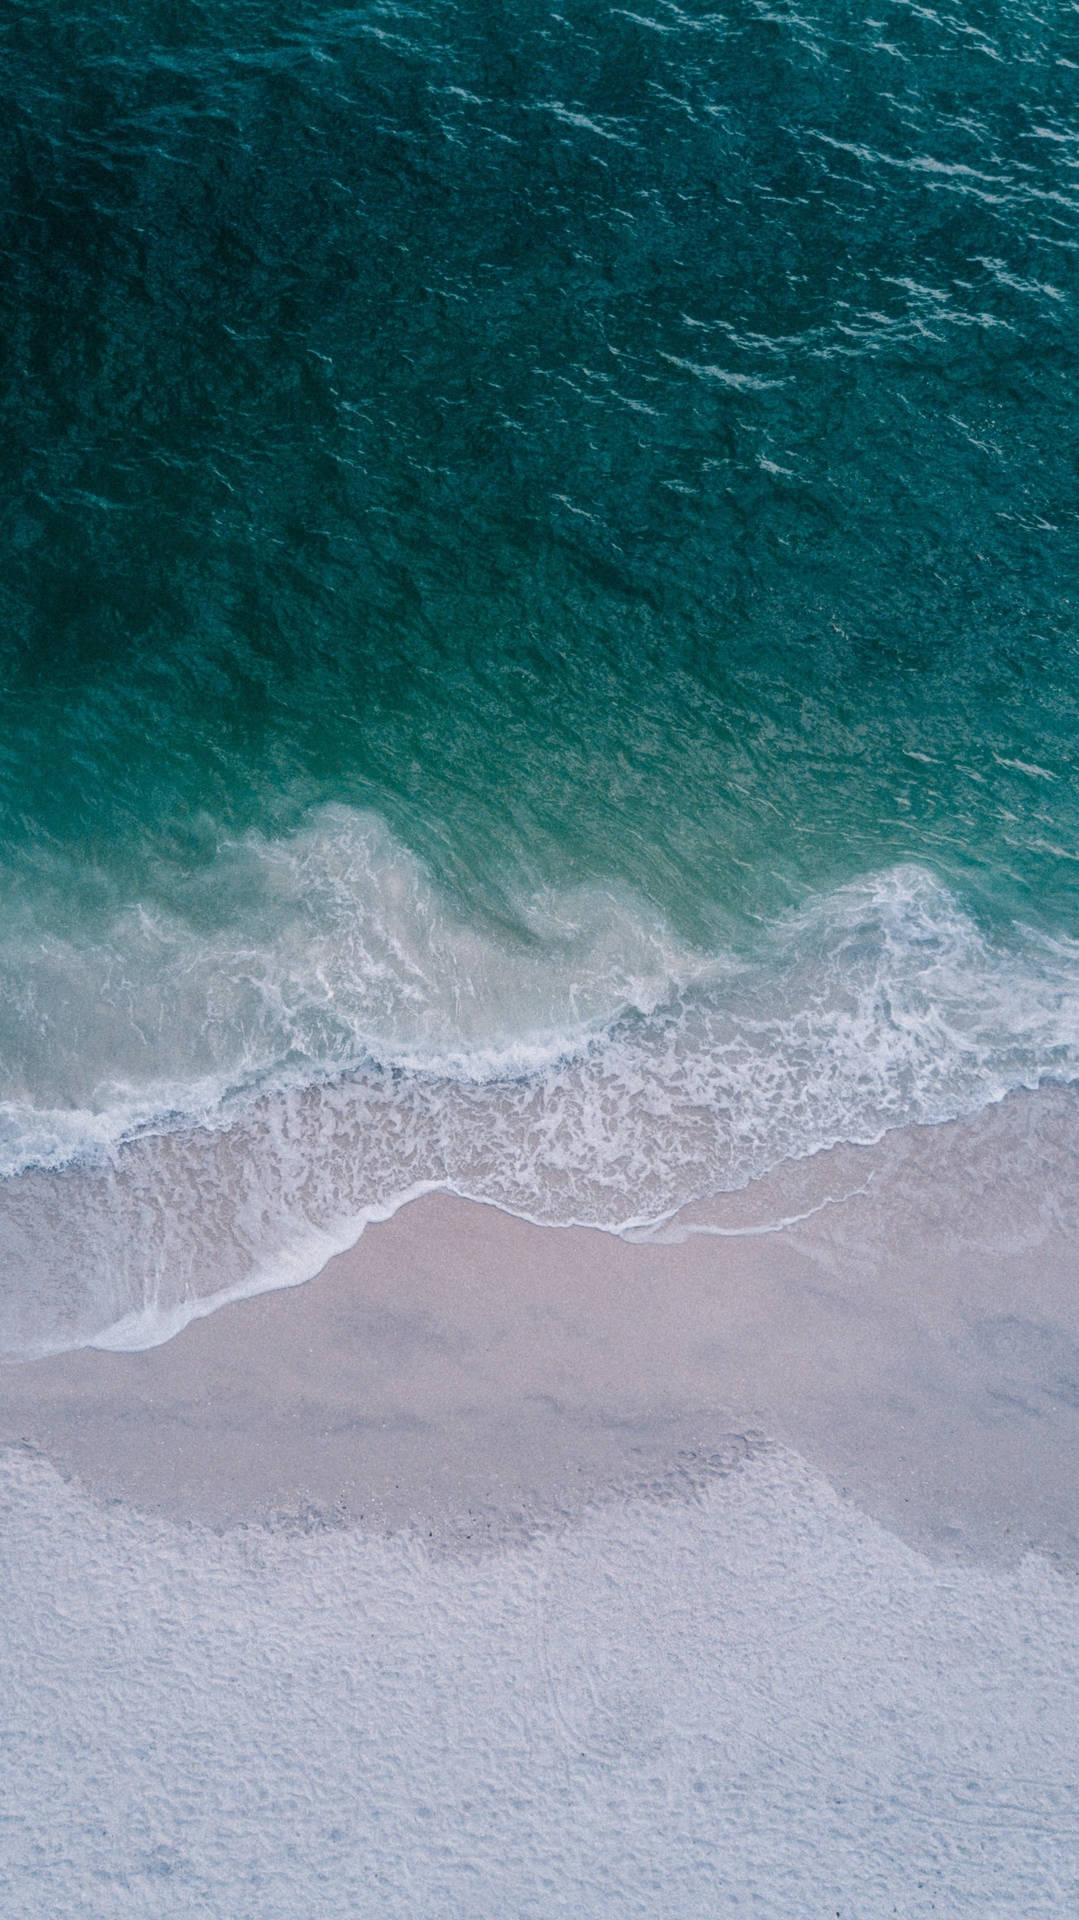 4k Iphone Waves At White Sand Beach Background